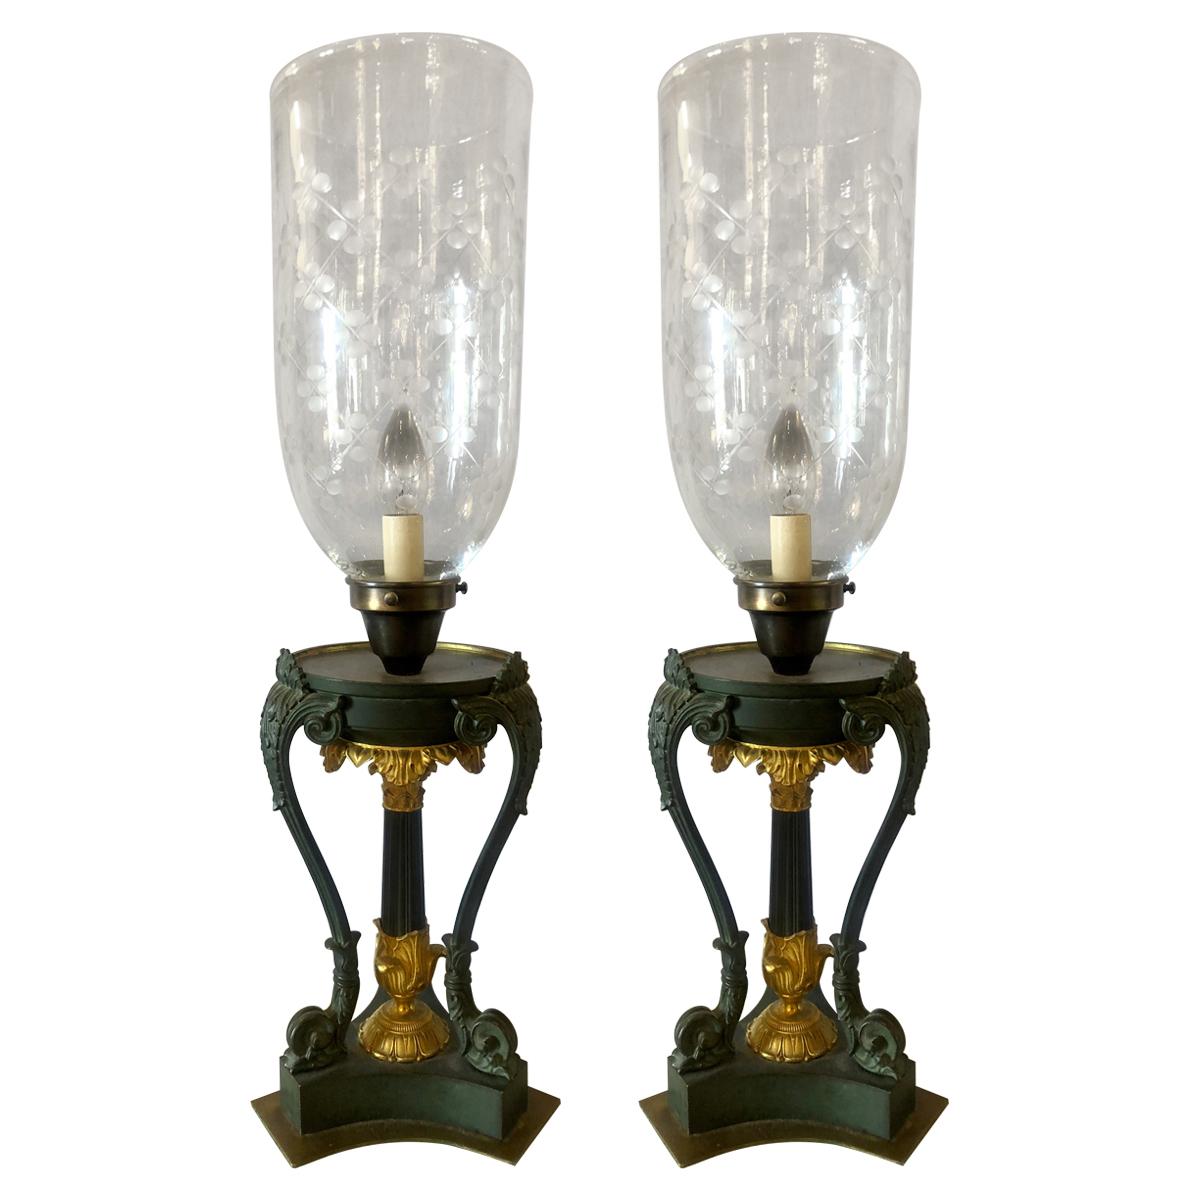 Pair of Empire Dore and Patinted Bronze Hurricanes, 19th Century